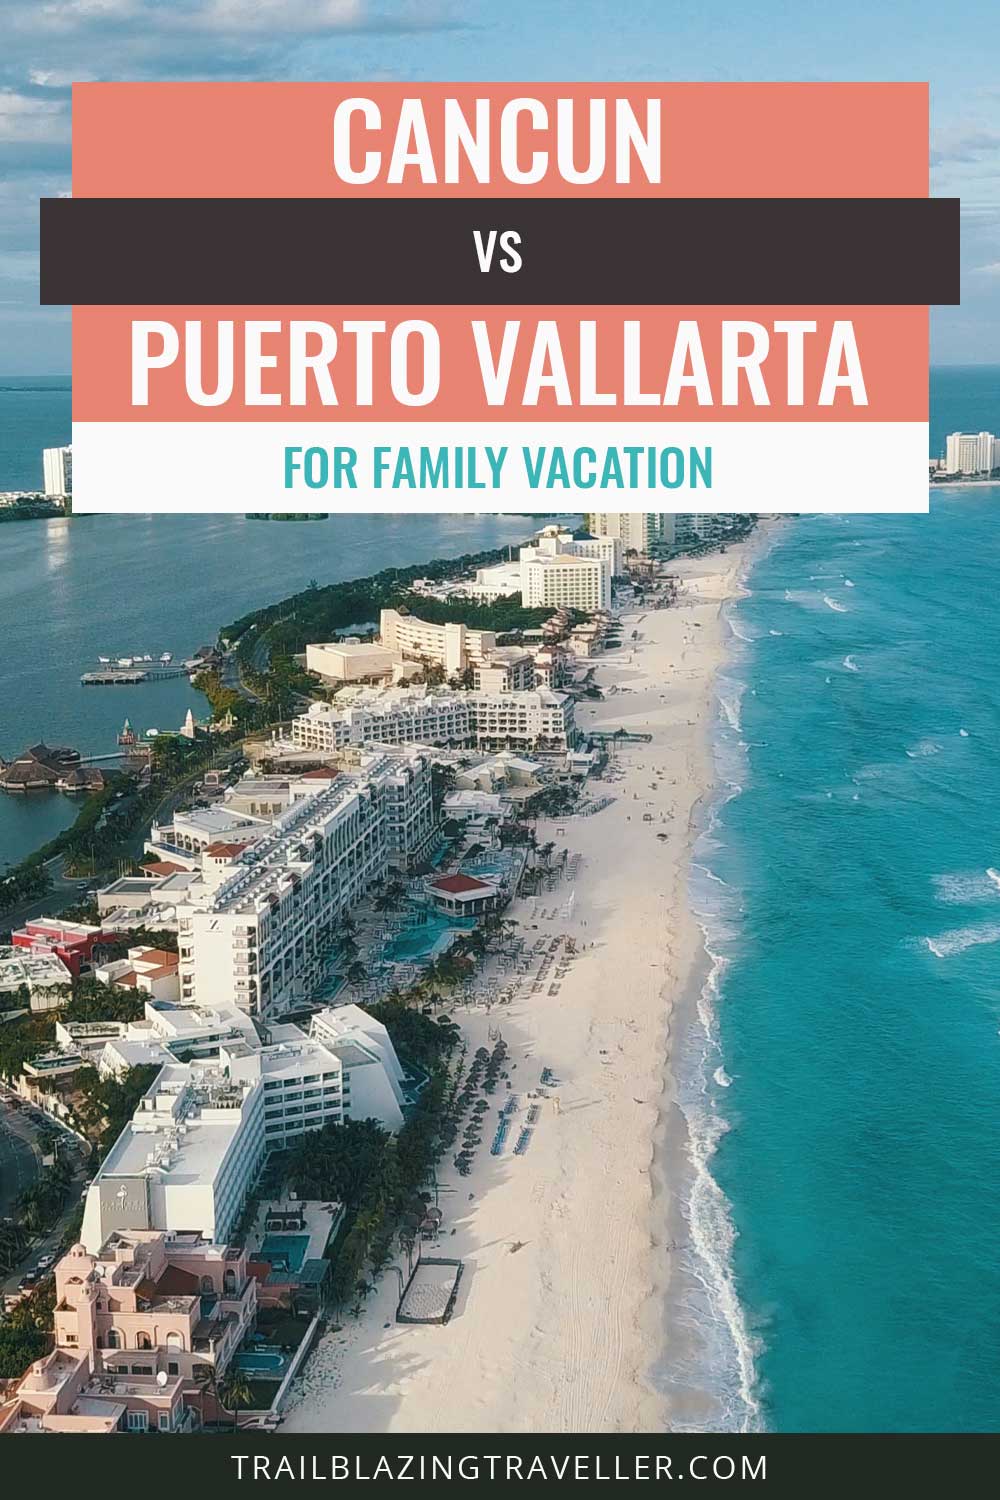 An island with buildings - Cancun vs. Puerto Vallarta For Family Vacation.